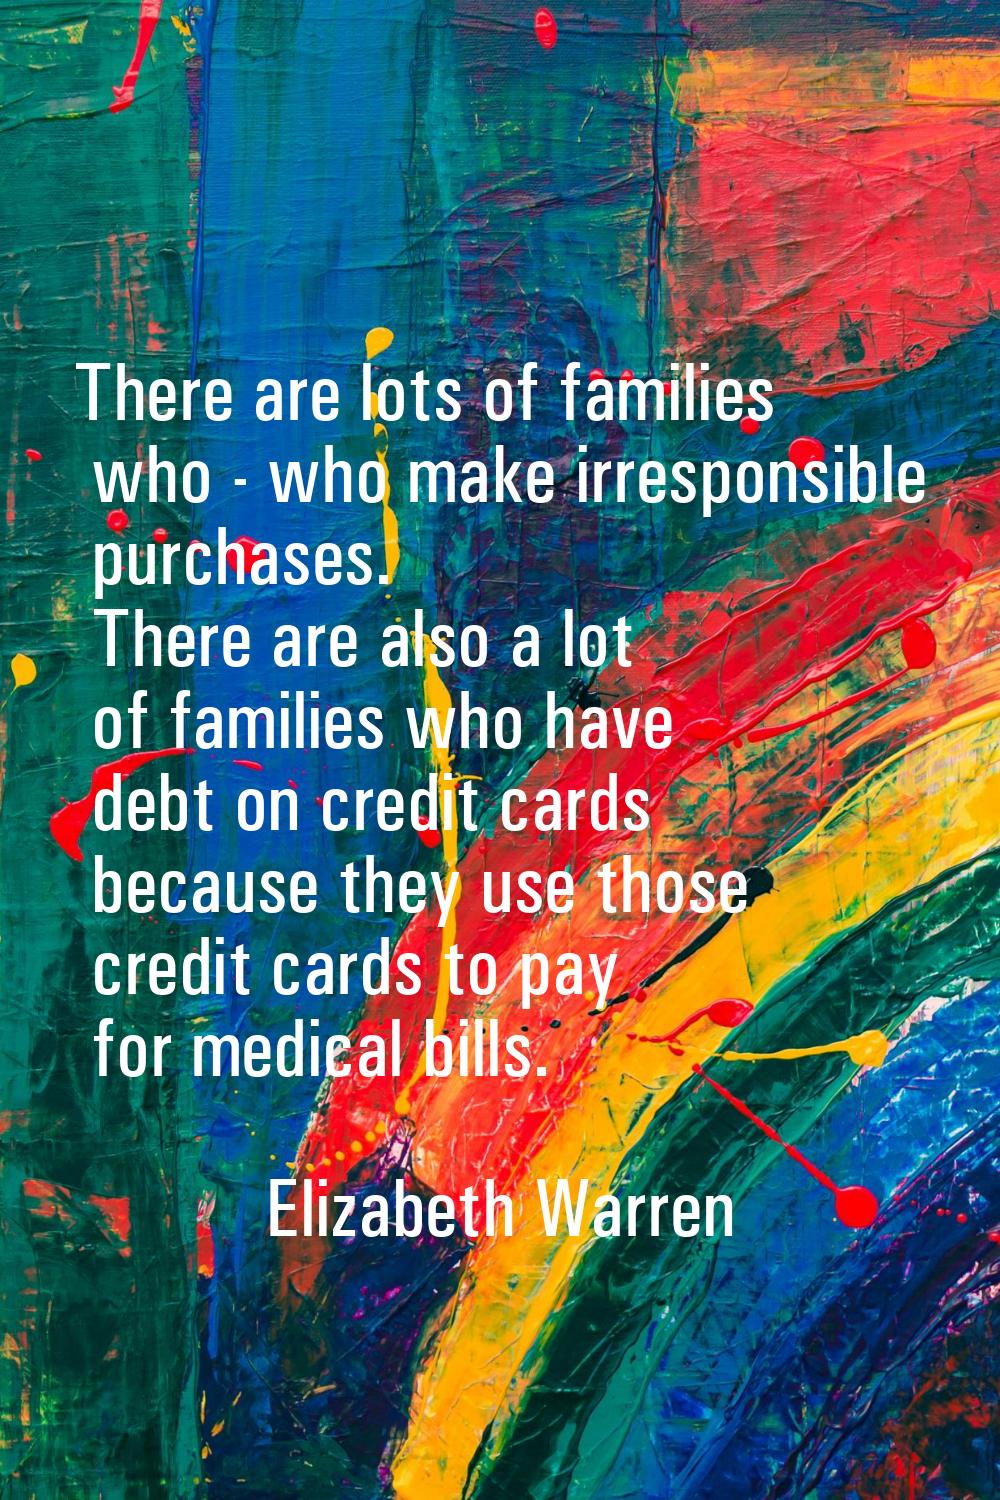 There are lots of families who - who make irresponsible purchases. There are also a lot of families